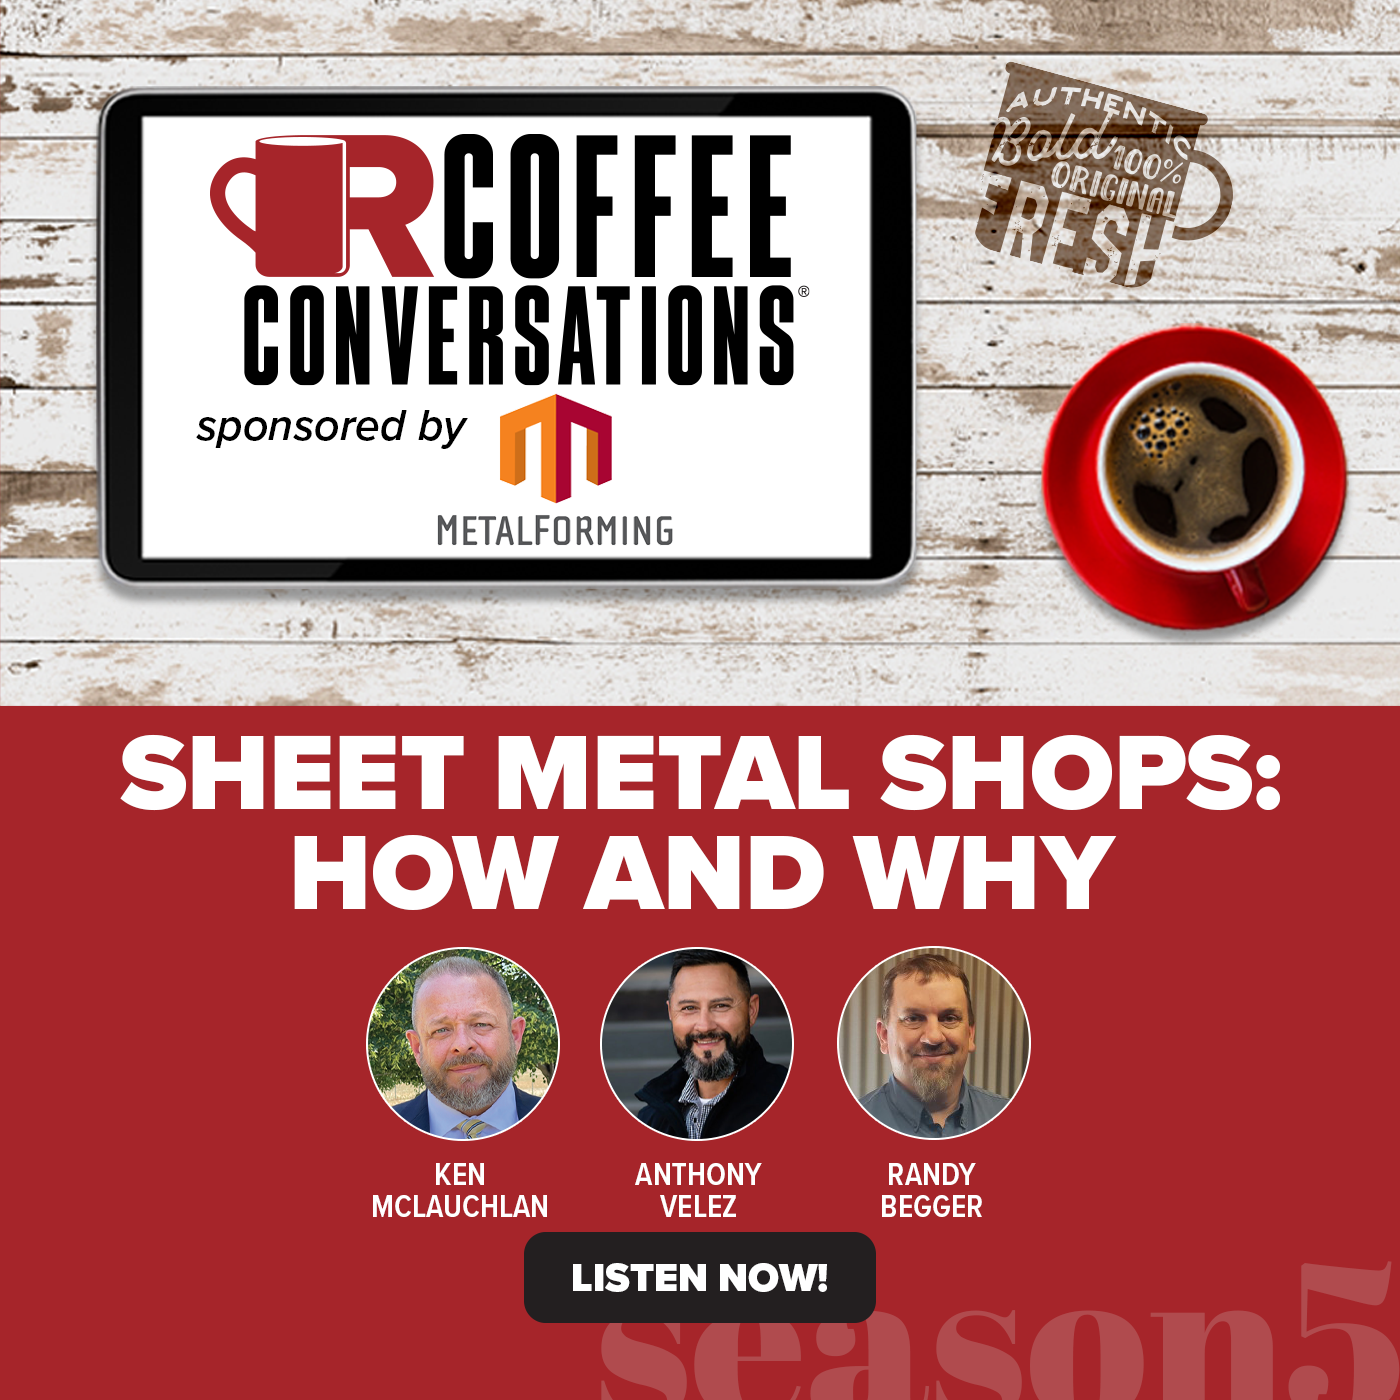 MetalForming - Coffee Conversations - Sheet Metal Shops: Why and How